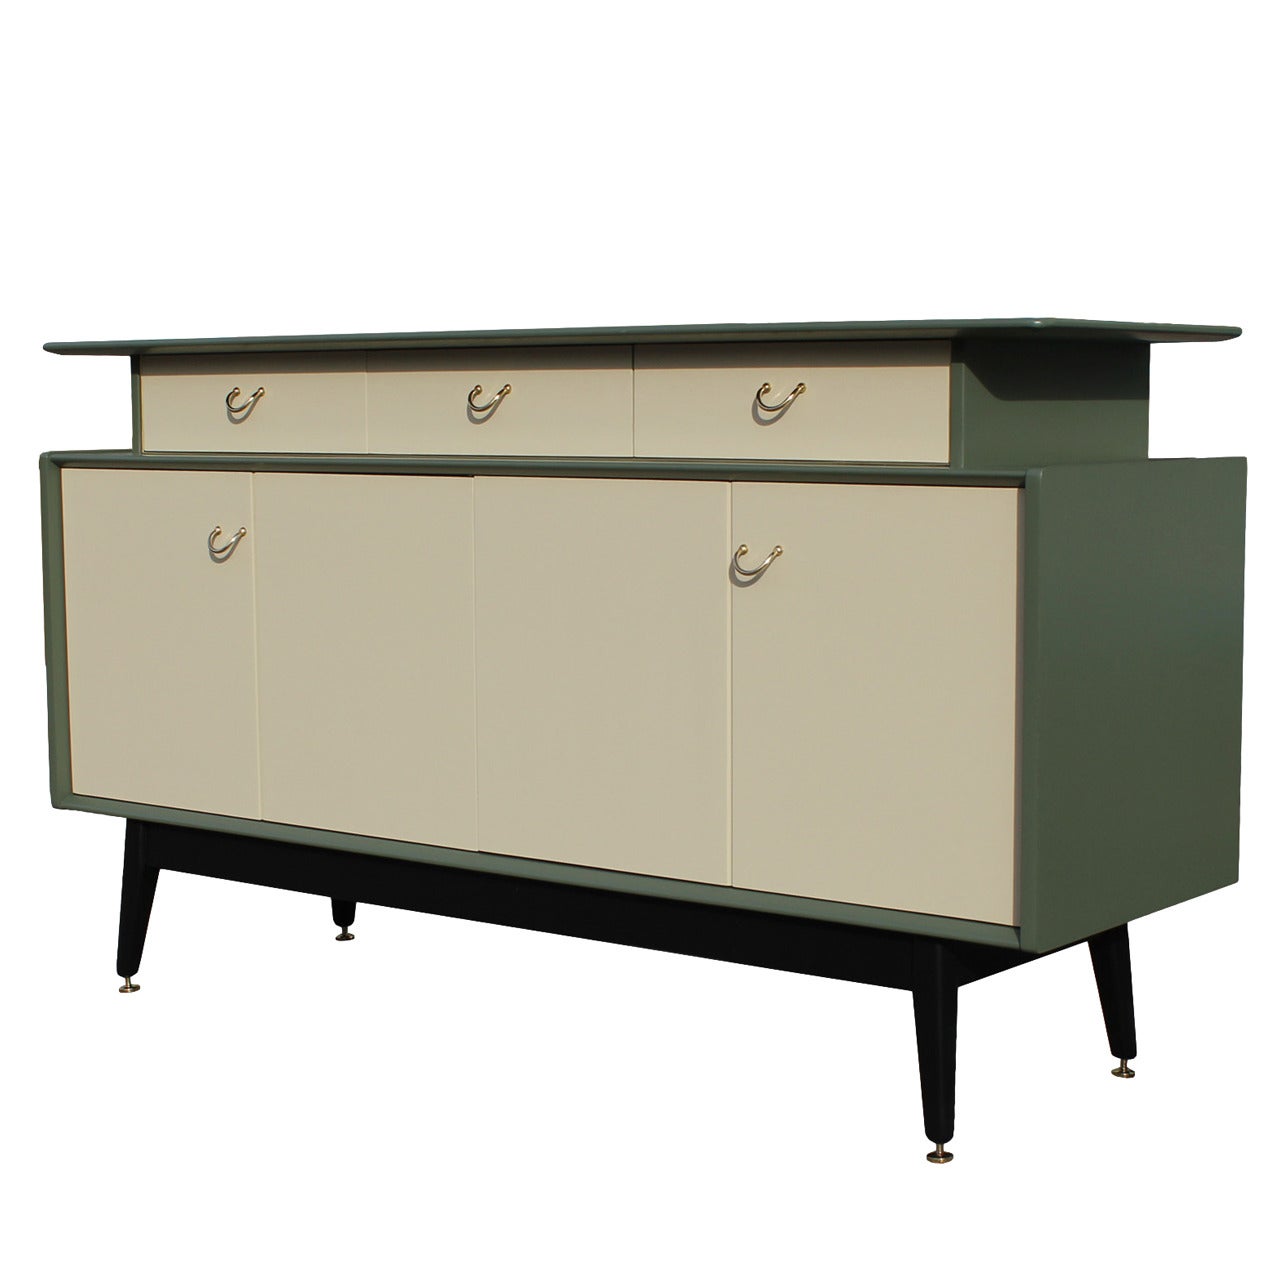 Stunning Green Color-Block Sideboard with Brass Accents